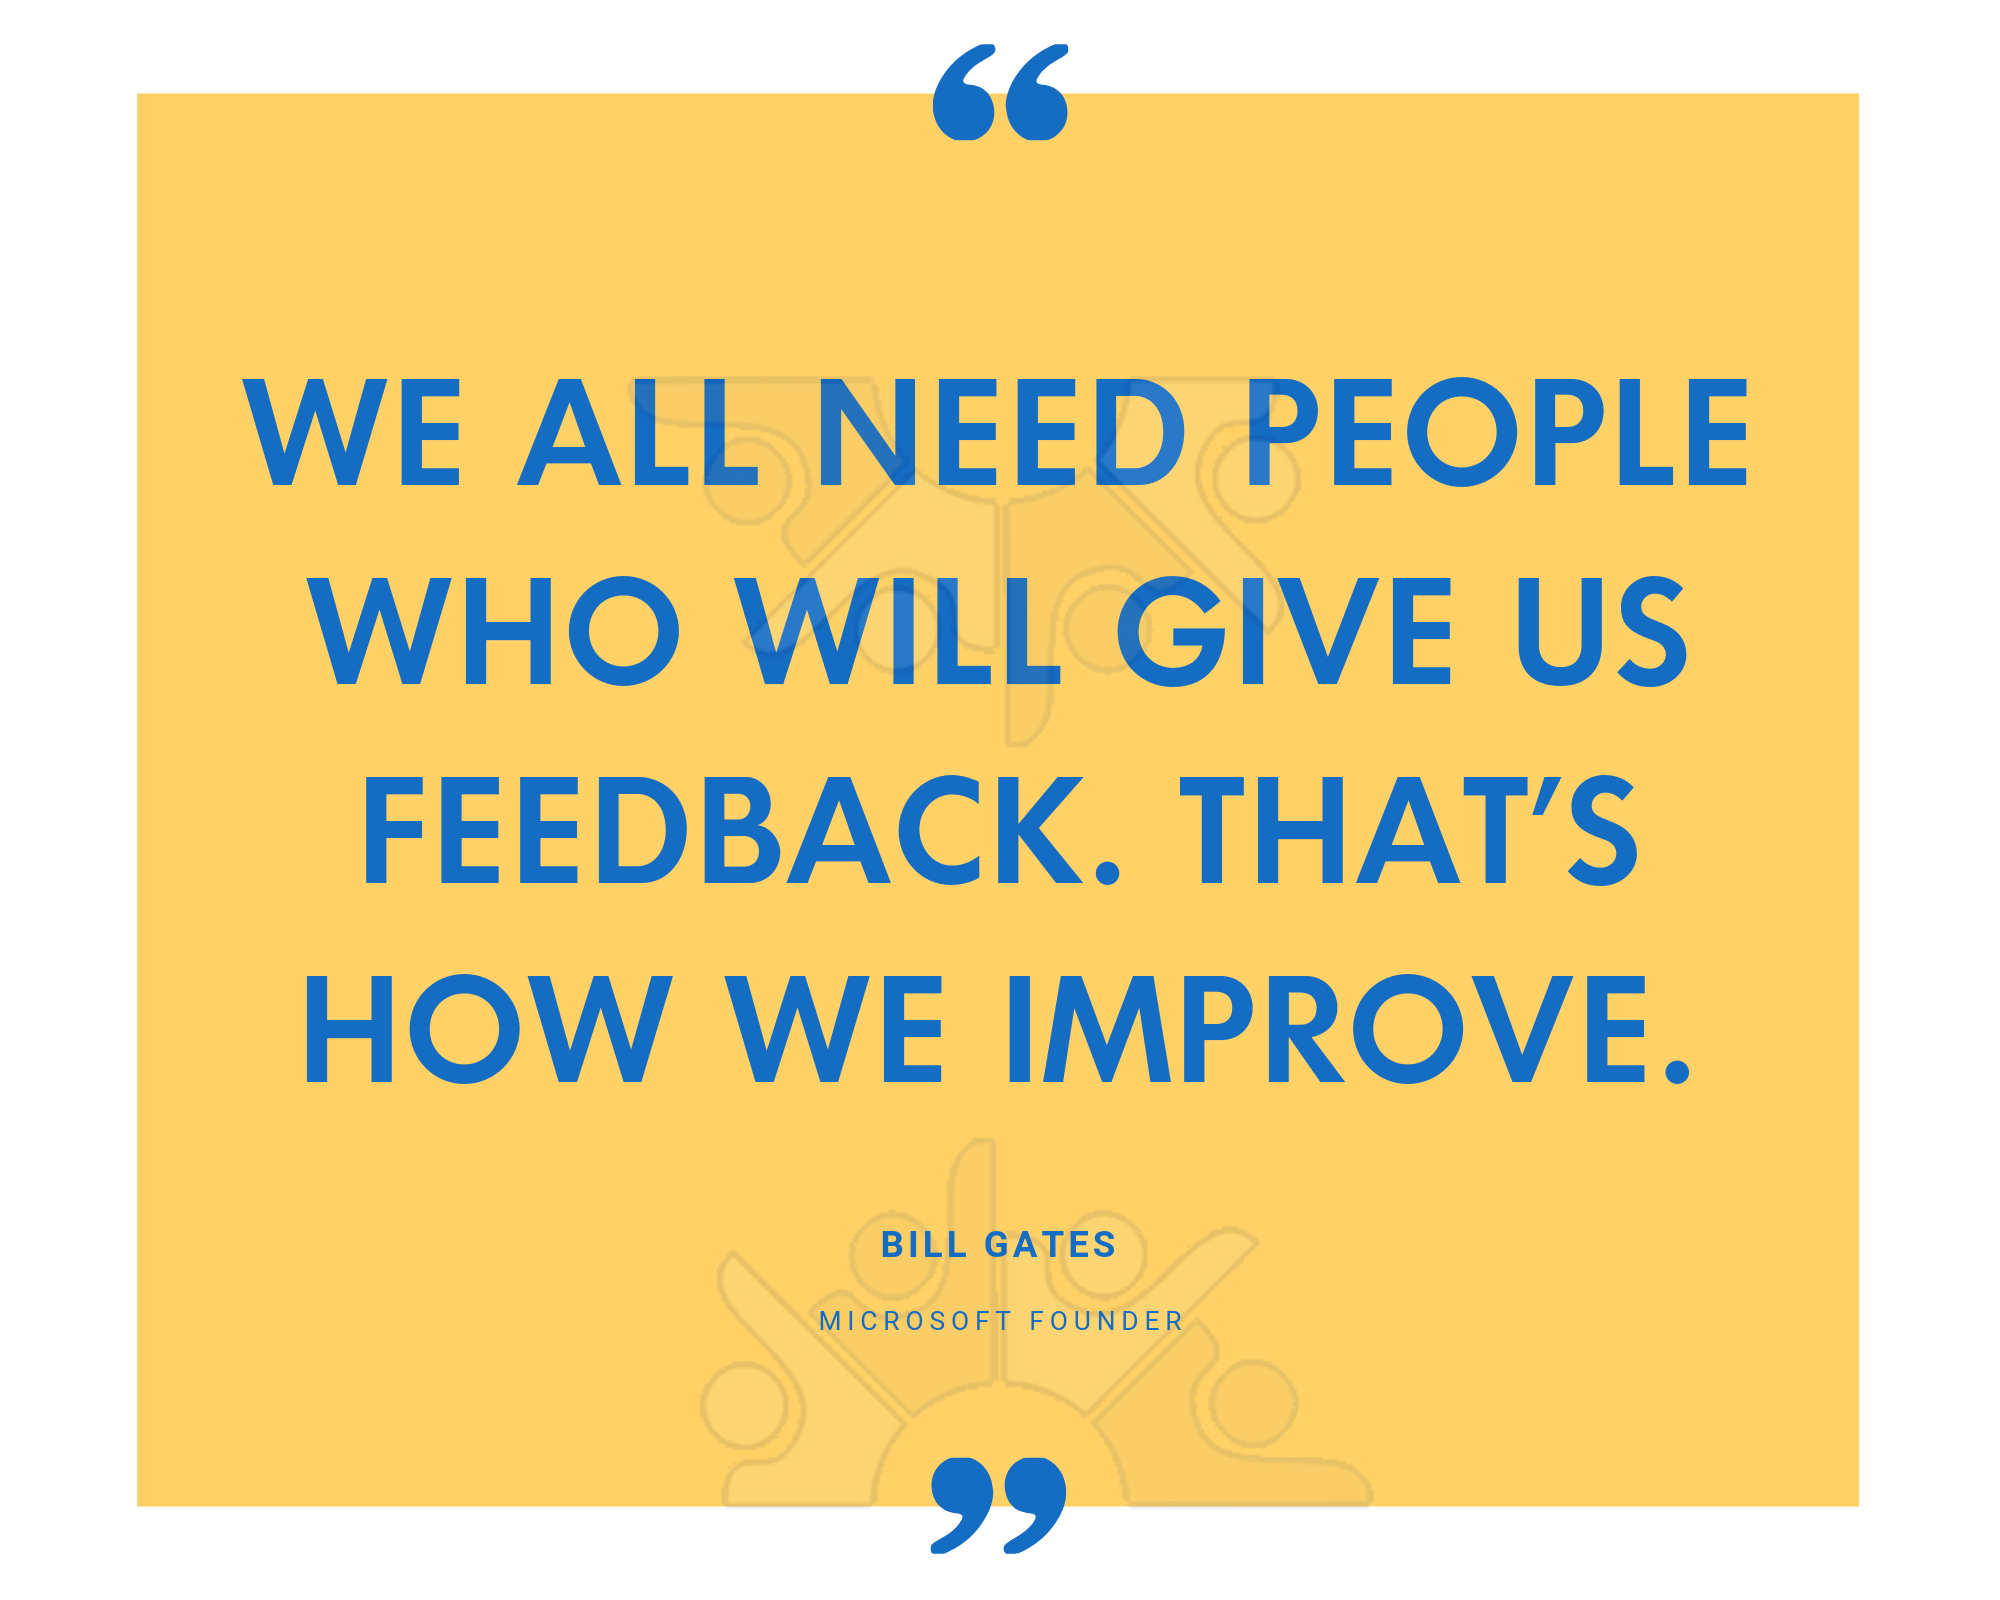 We all need people who will give us feedback. That’s how we improve.